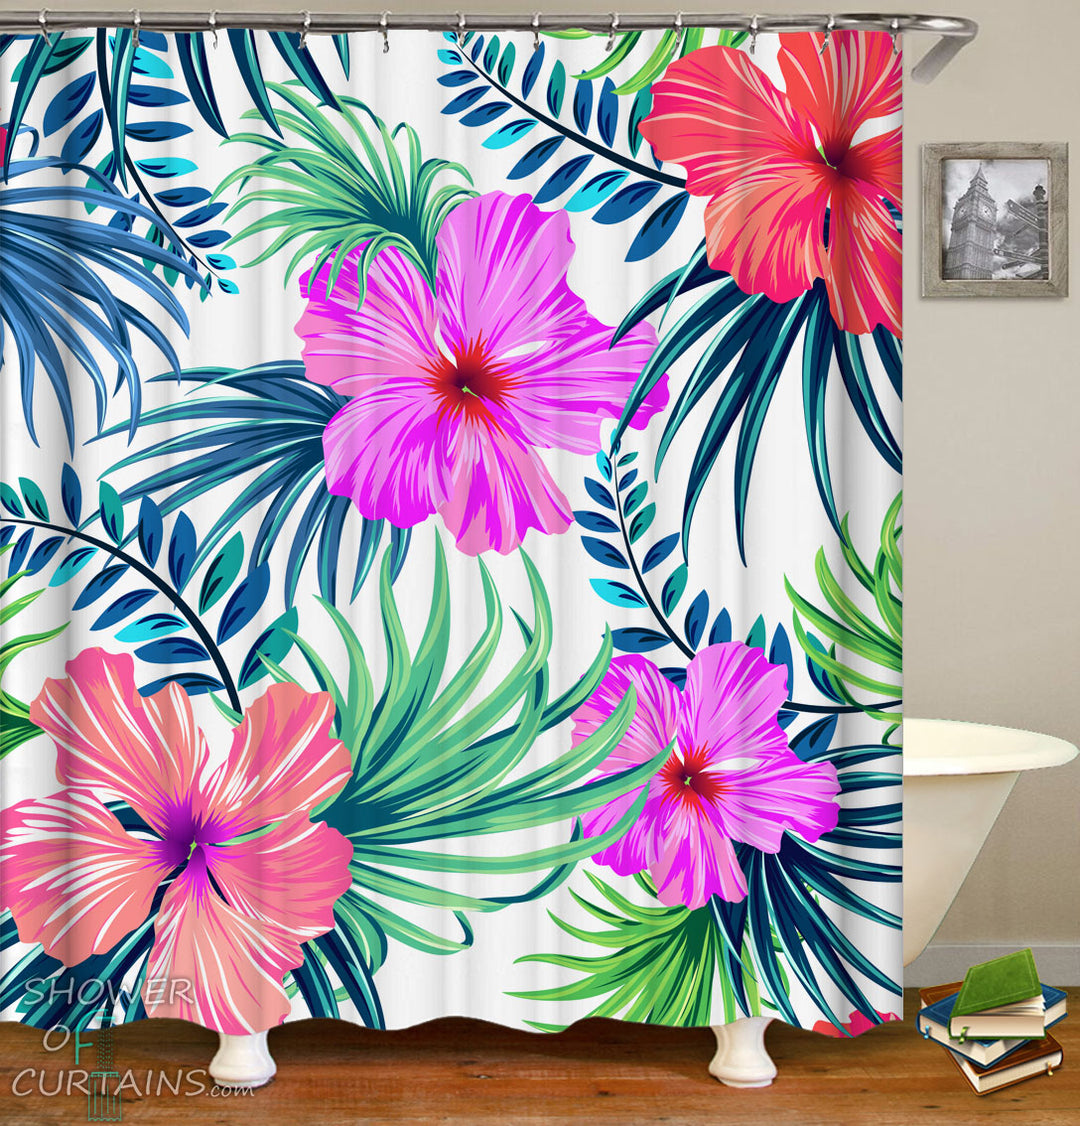 Hibiscus shower curtain - Tropical Flowers